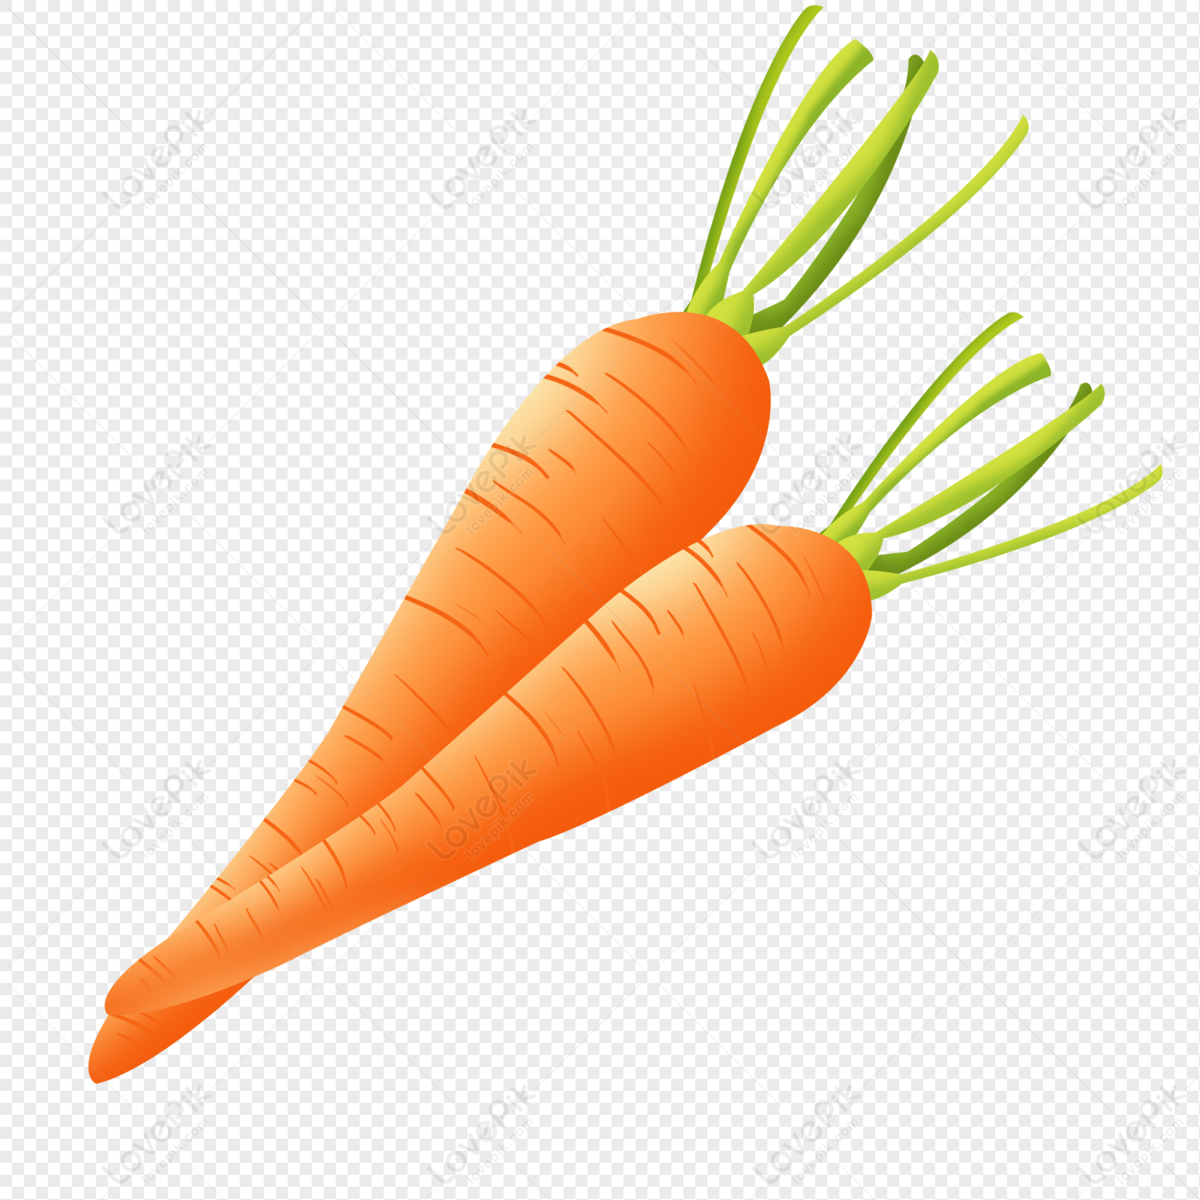 Cartoon Autumn Carrot PNG Picture And Clipart Image For Free Download -  Lovepik | 401548805